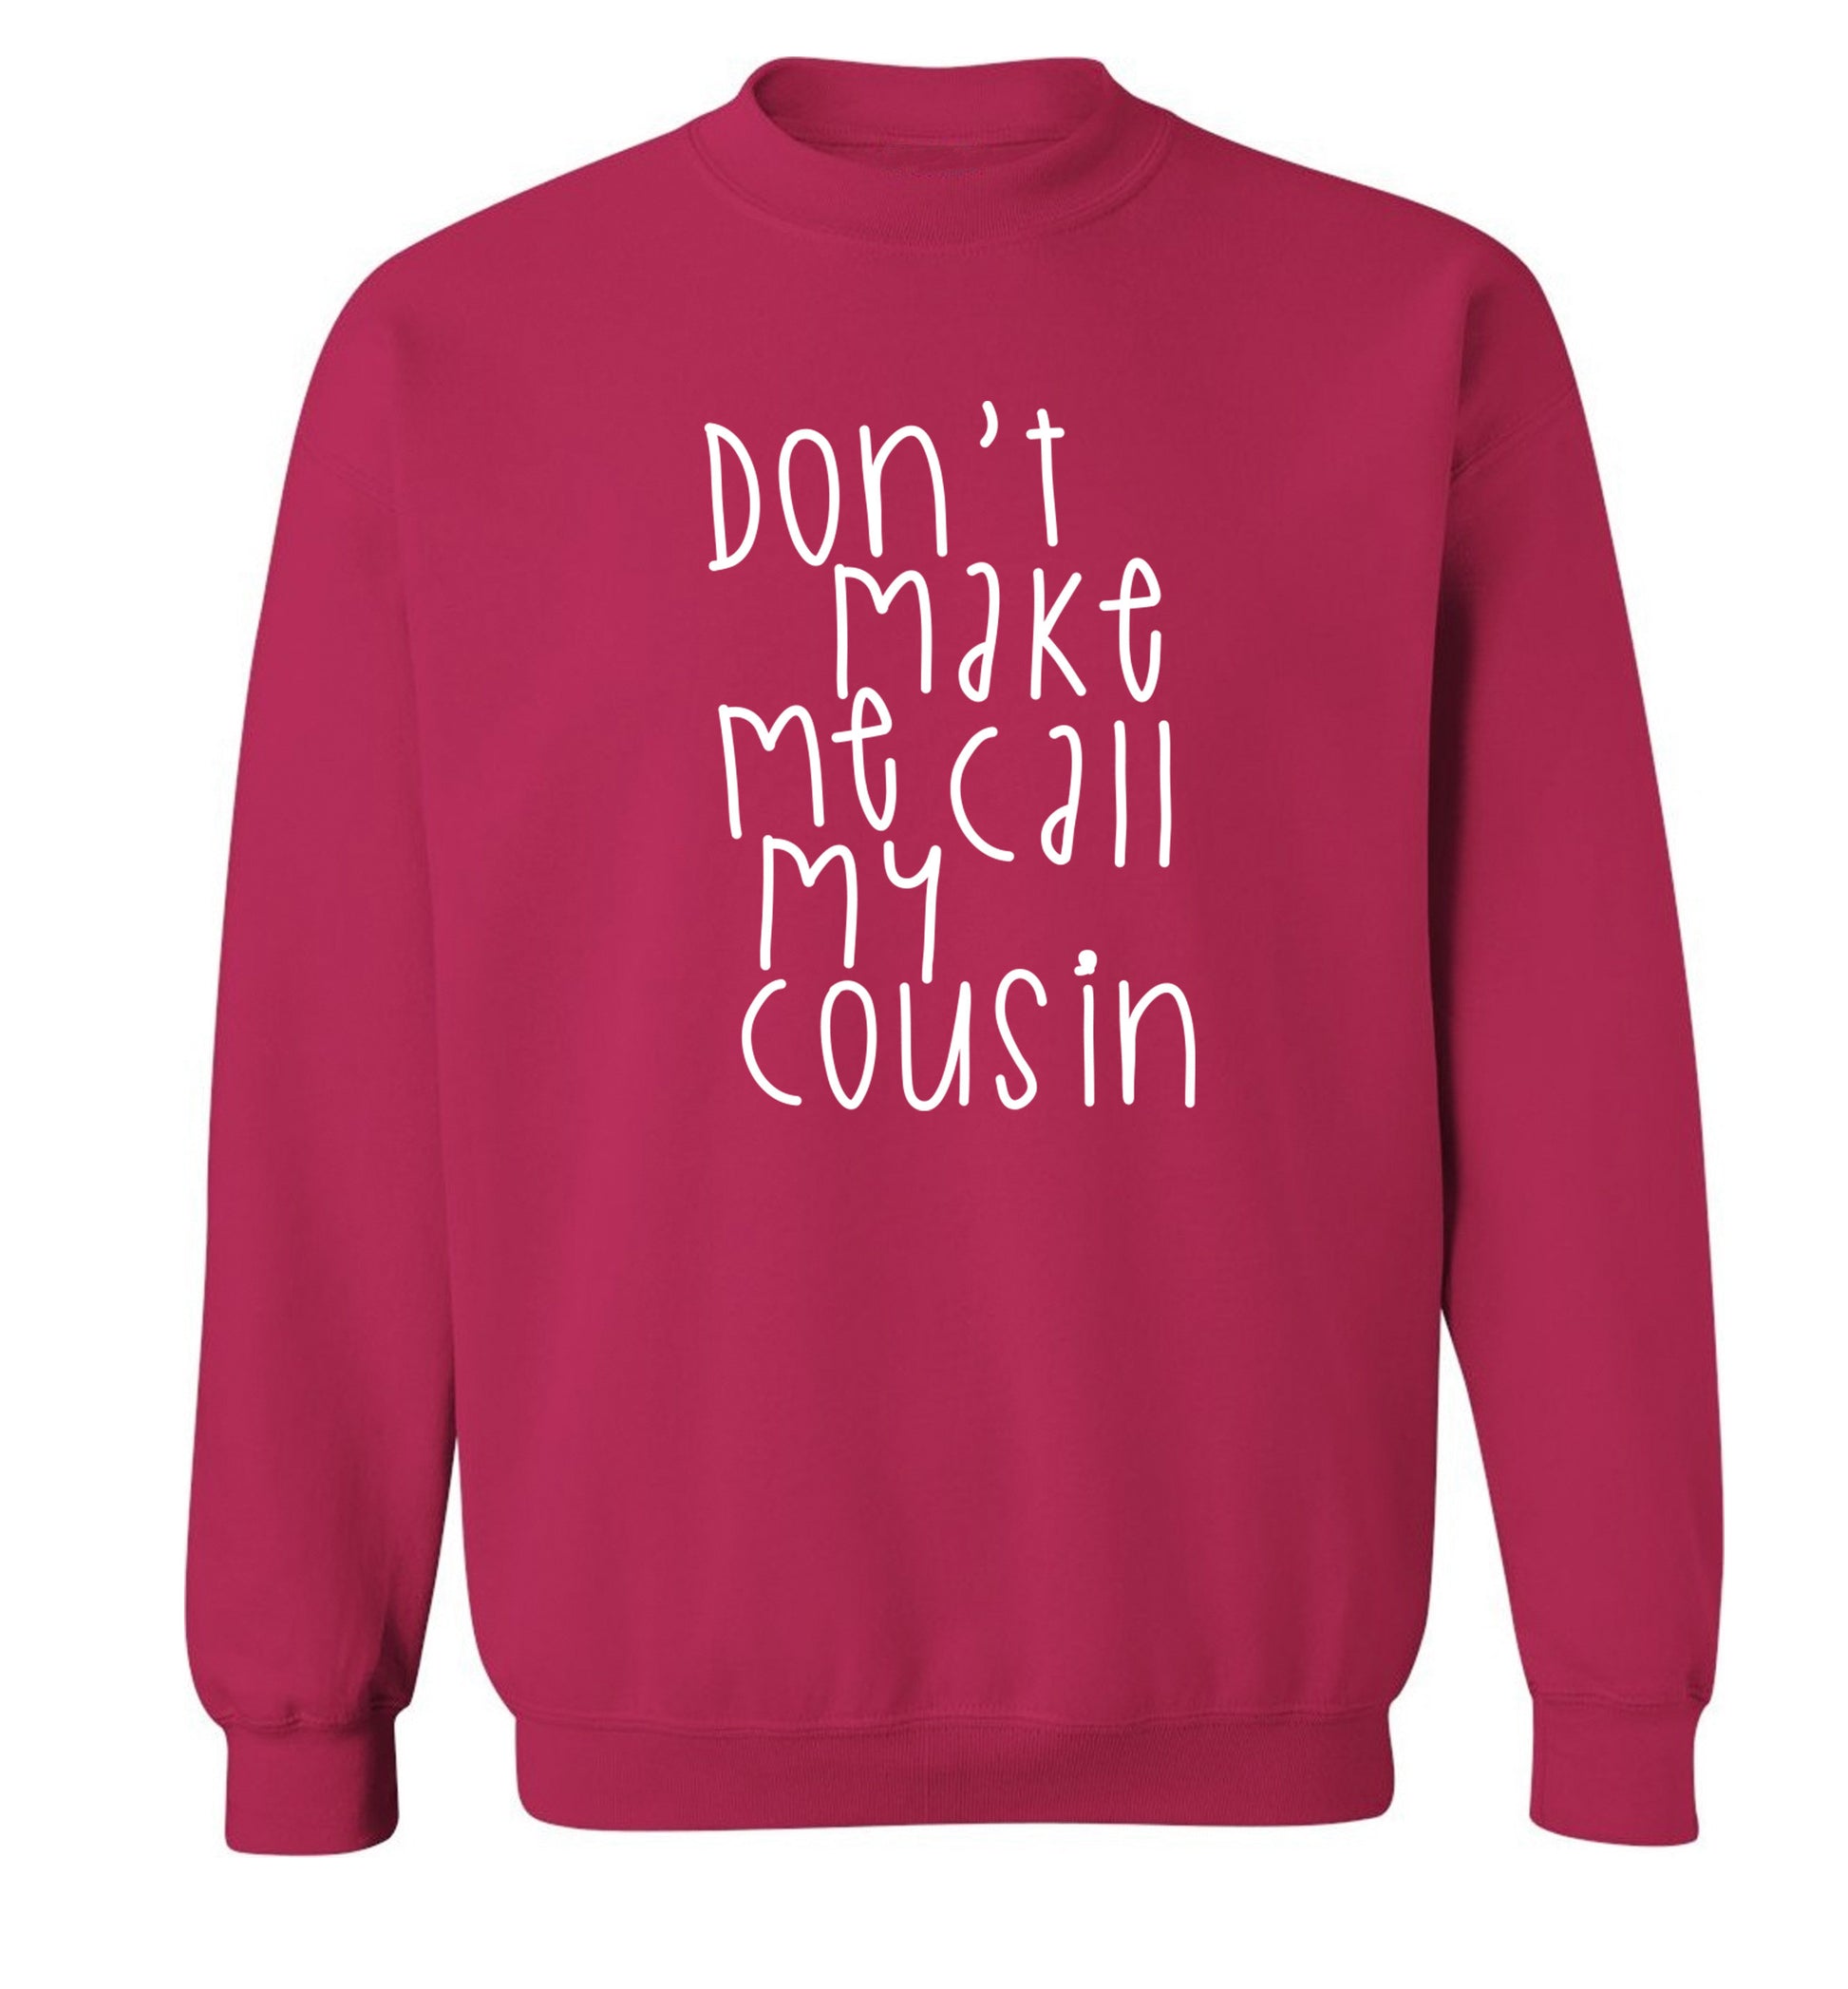 Don't make me call my cousin Adult's unisex pink Sweater 2XL